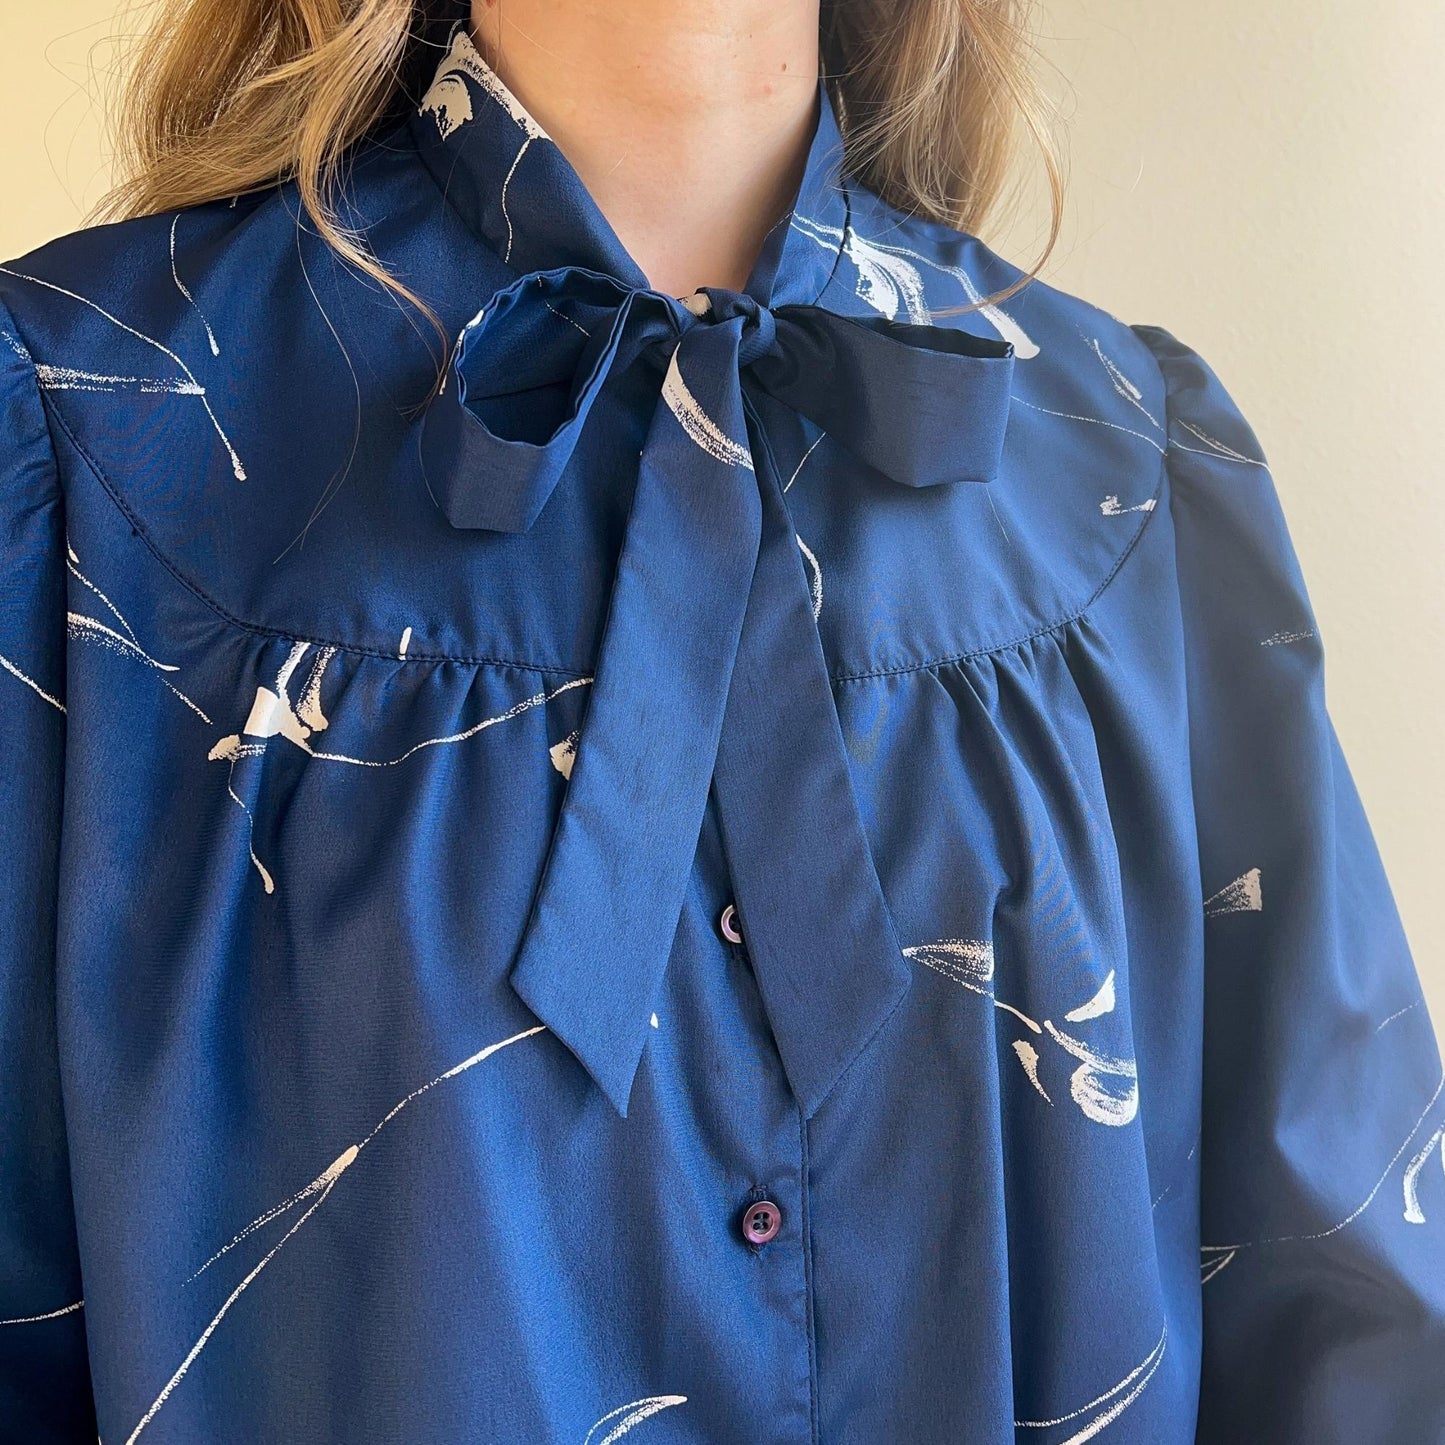 1990s Blue Abstract Print Blouse (L/XL)